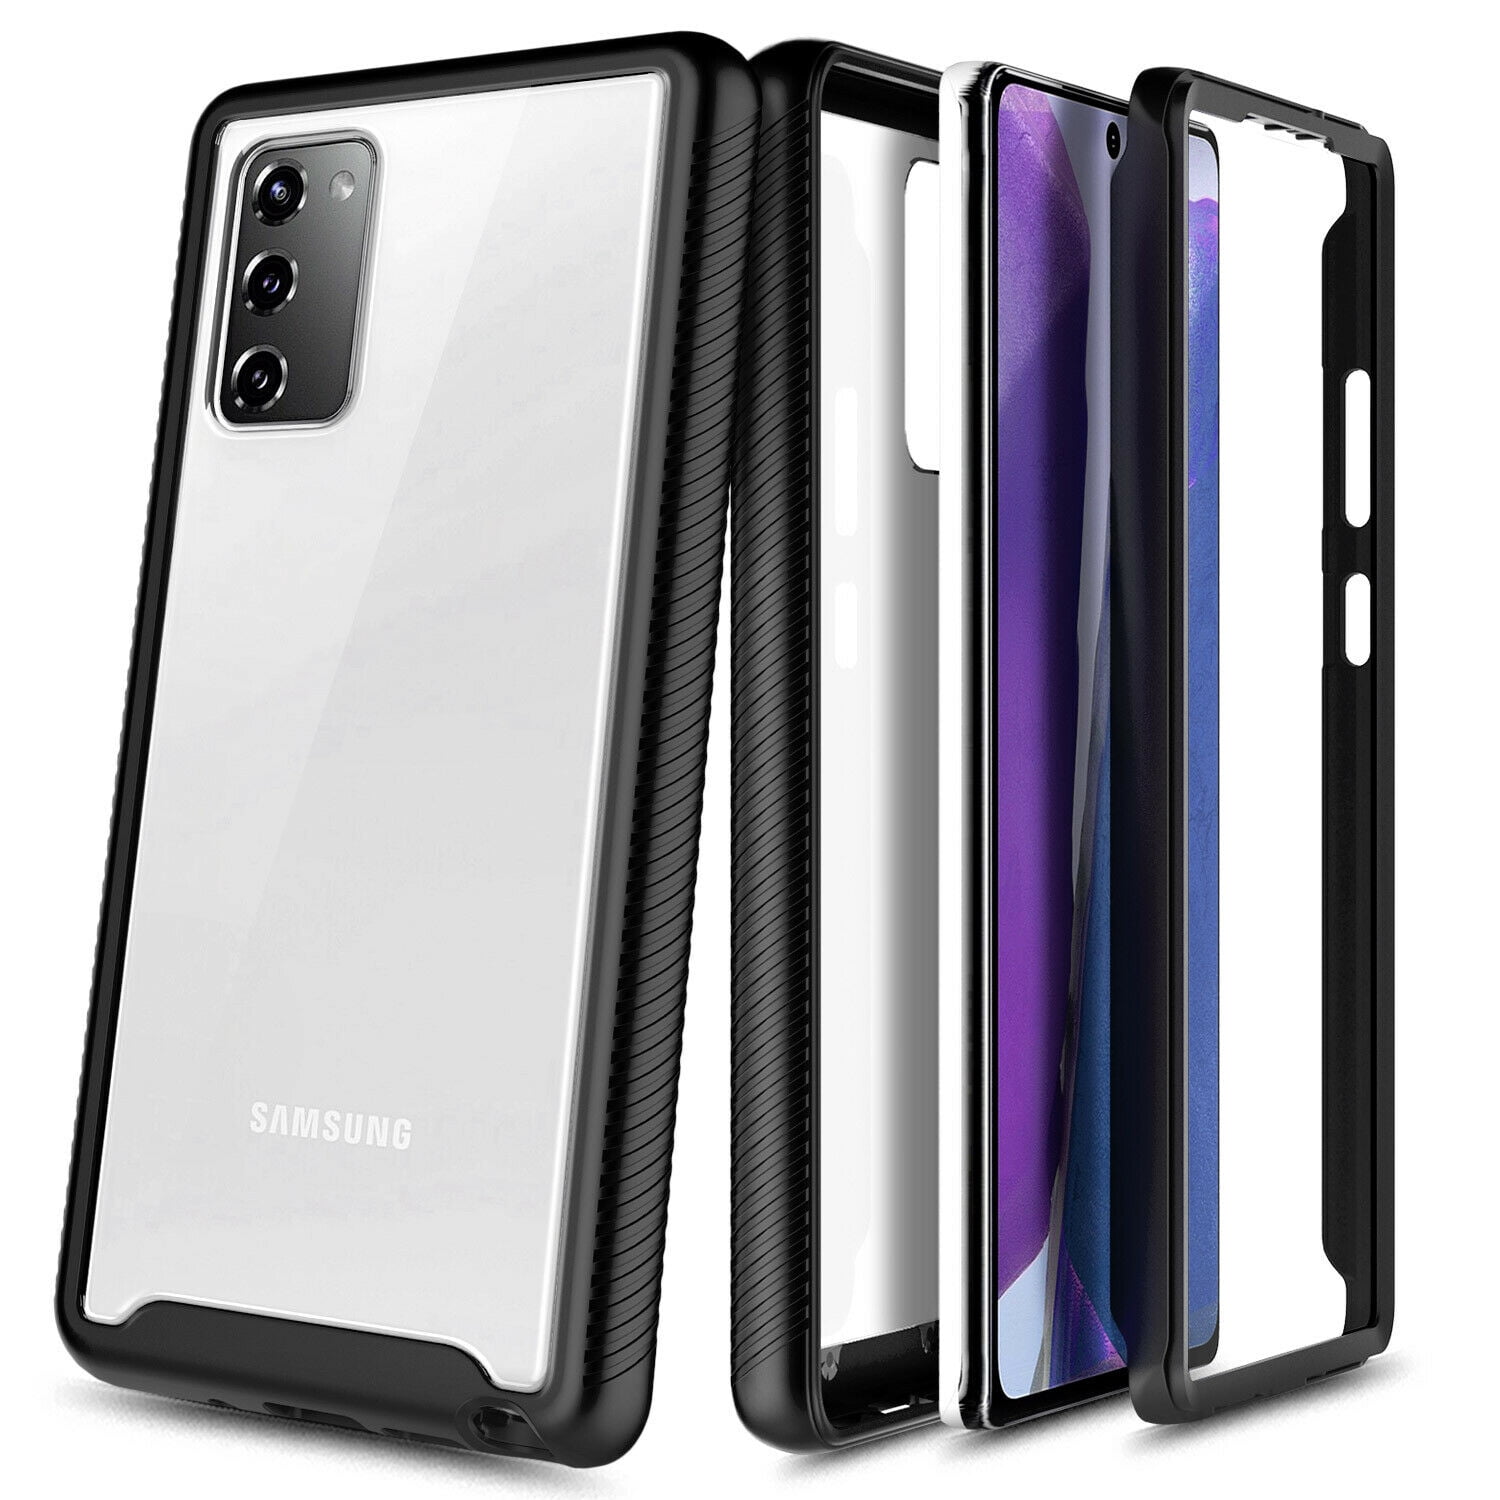  MZELQ for Samsung Galaxy S20 FE 5G Case 6.5 Inch with